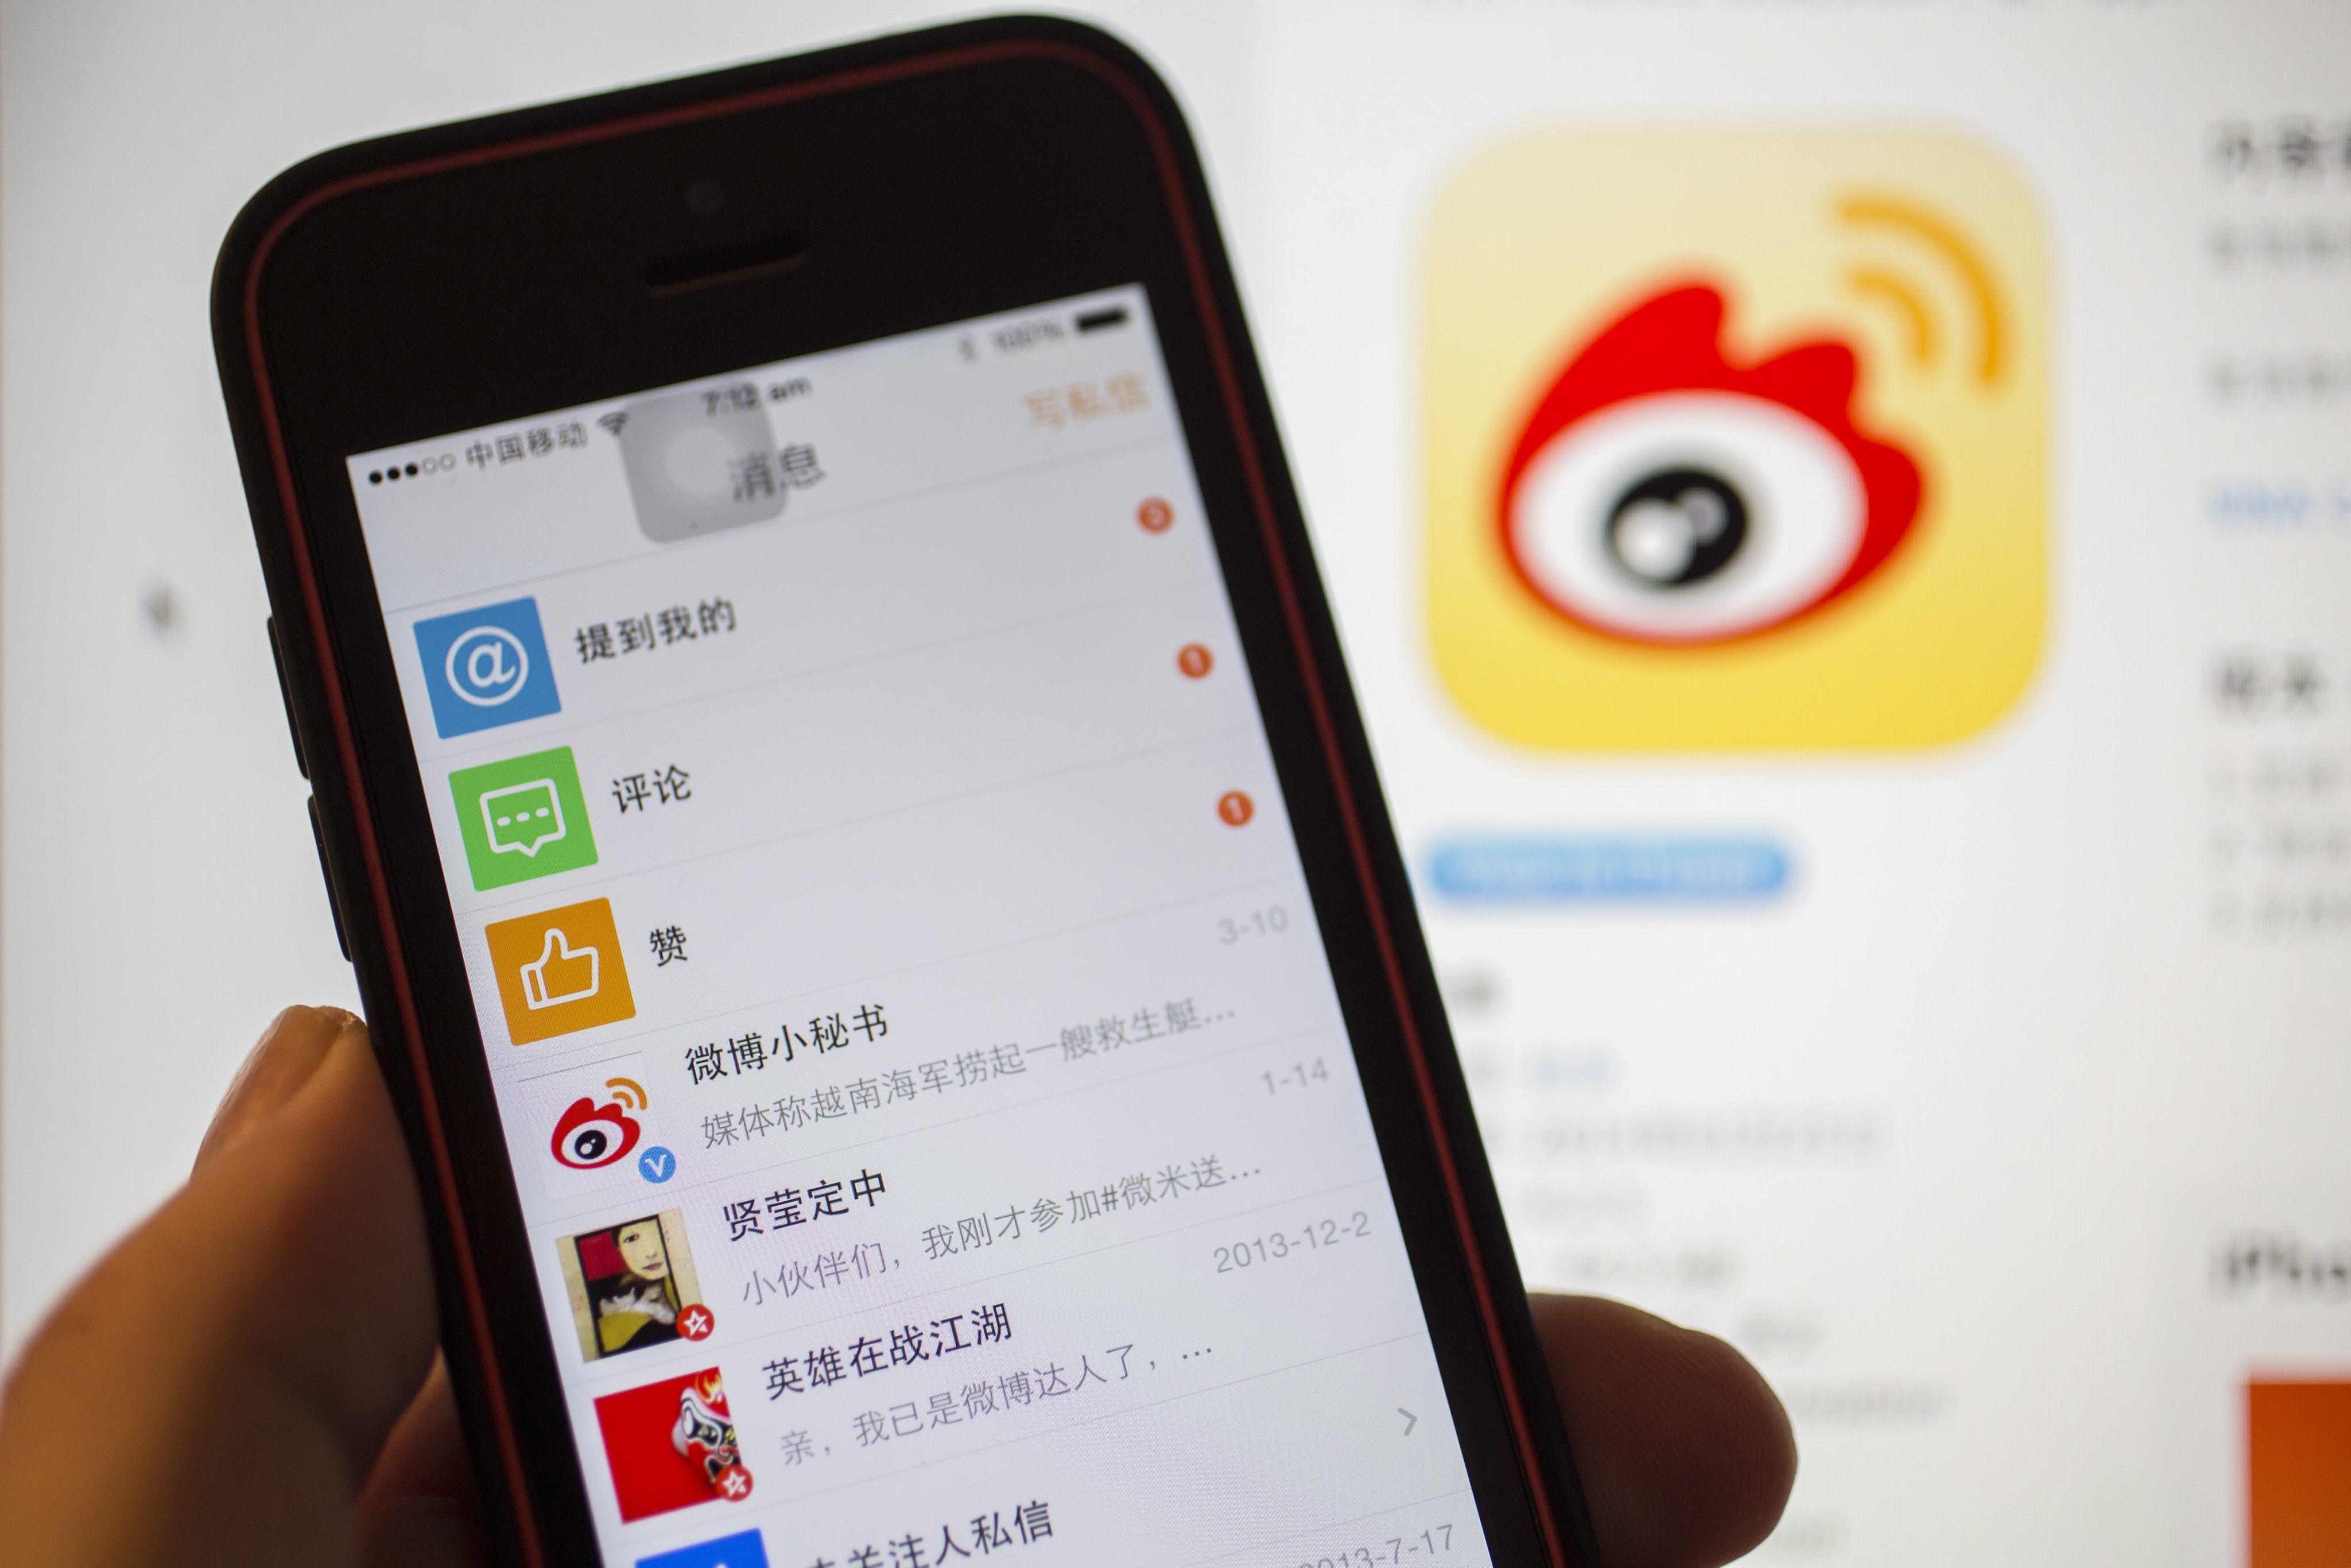 Weibo, which means micro blog in Chinese, is a Chinese Twitter-like online networking tool. Photo: EPA